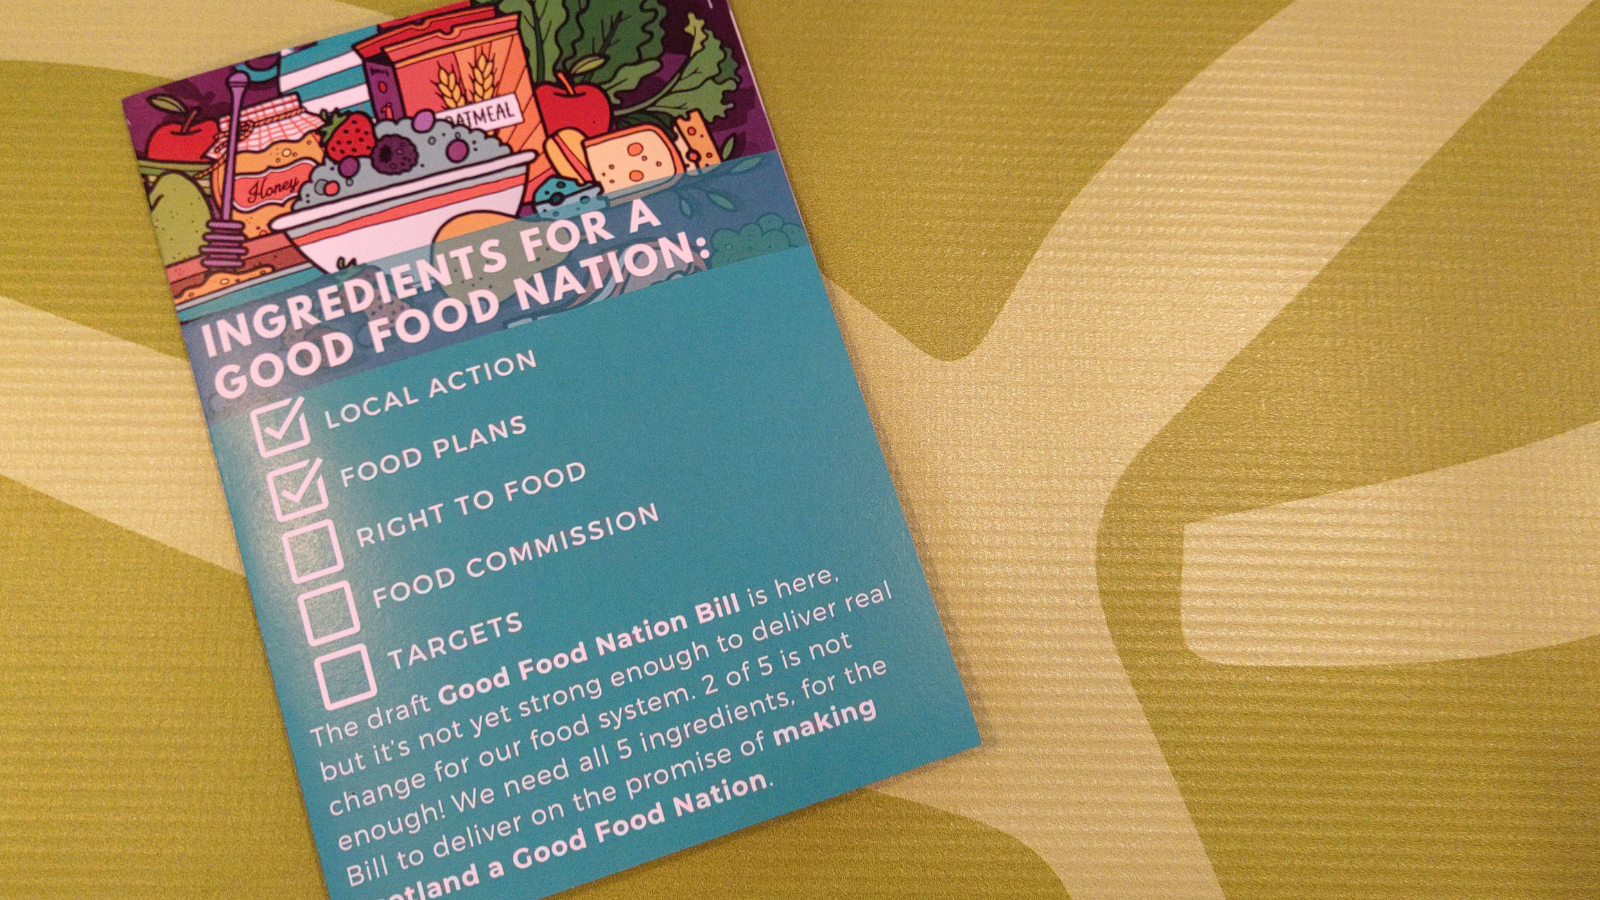 What happened to the Good Food Nation ambition?